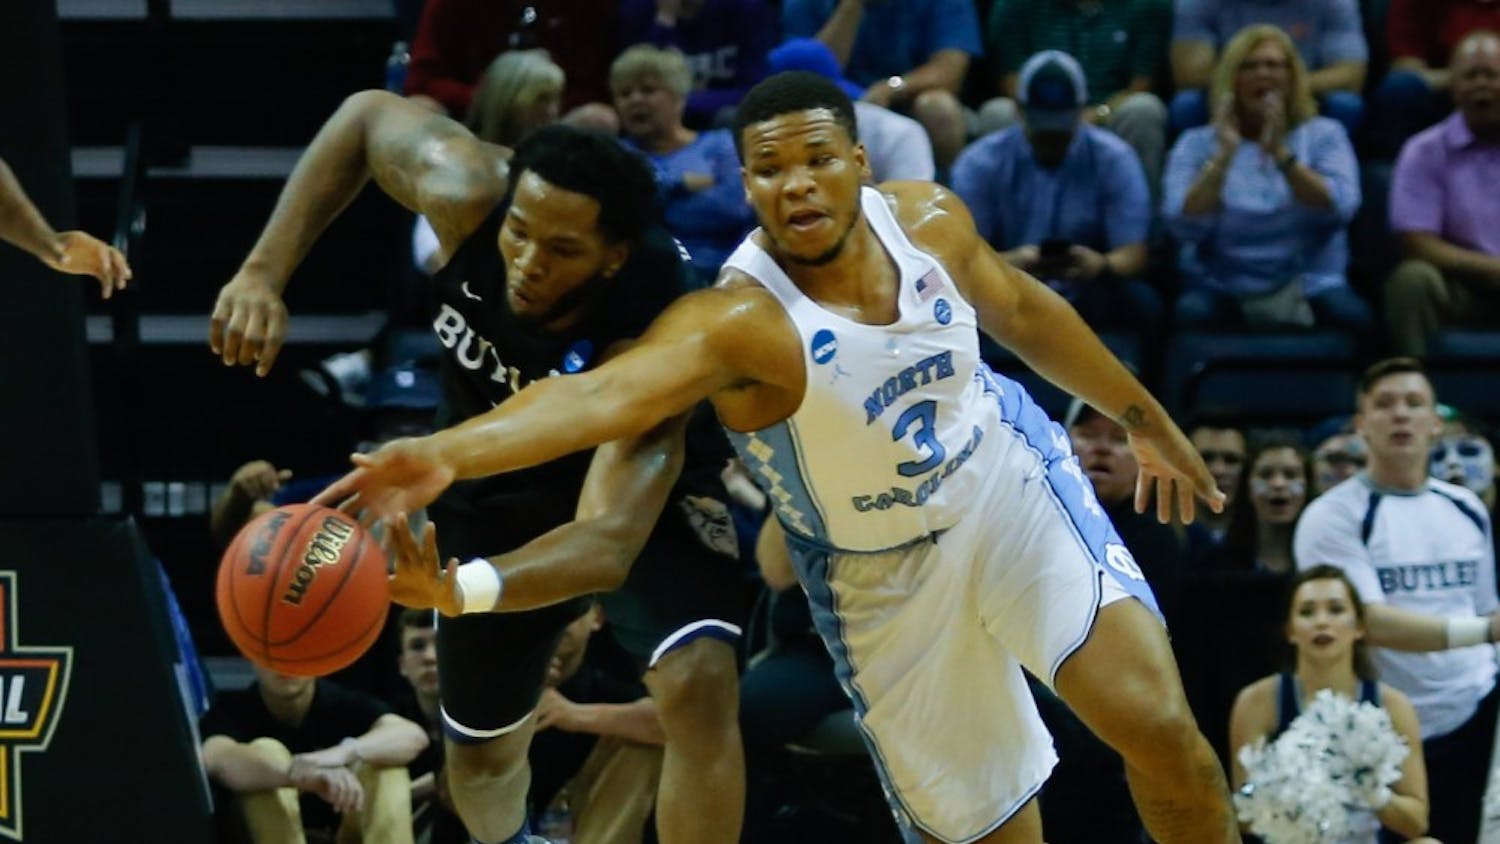 North Carolina forward Kennedy Meeks (3) lunges for a loose ball against Butler in the Sweet 16 matchup in Memphis on Friday.